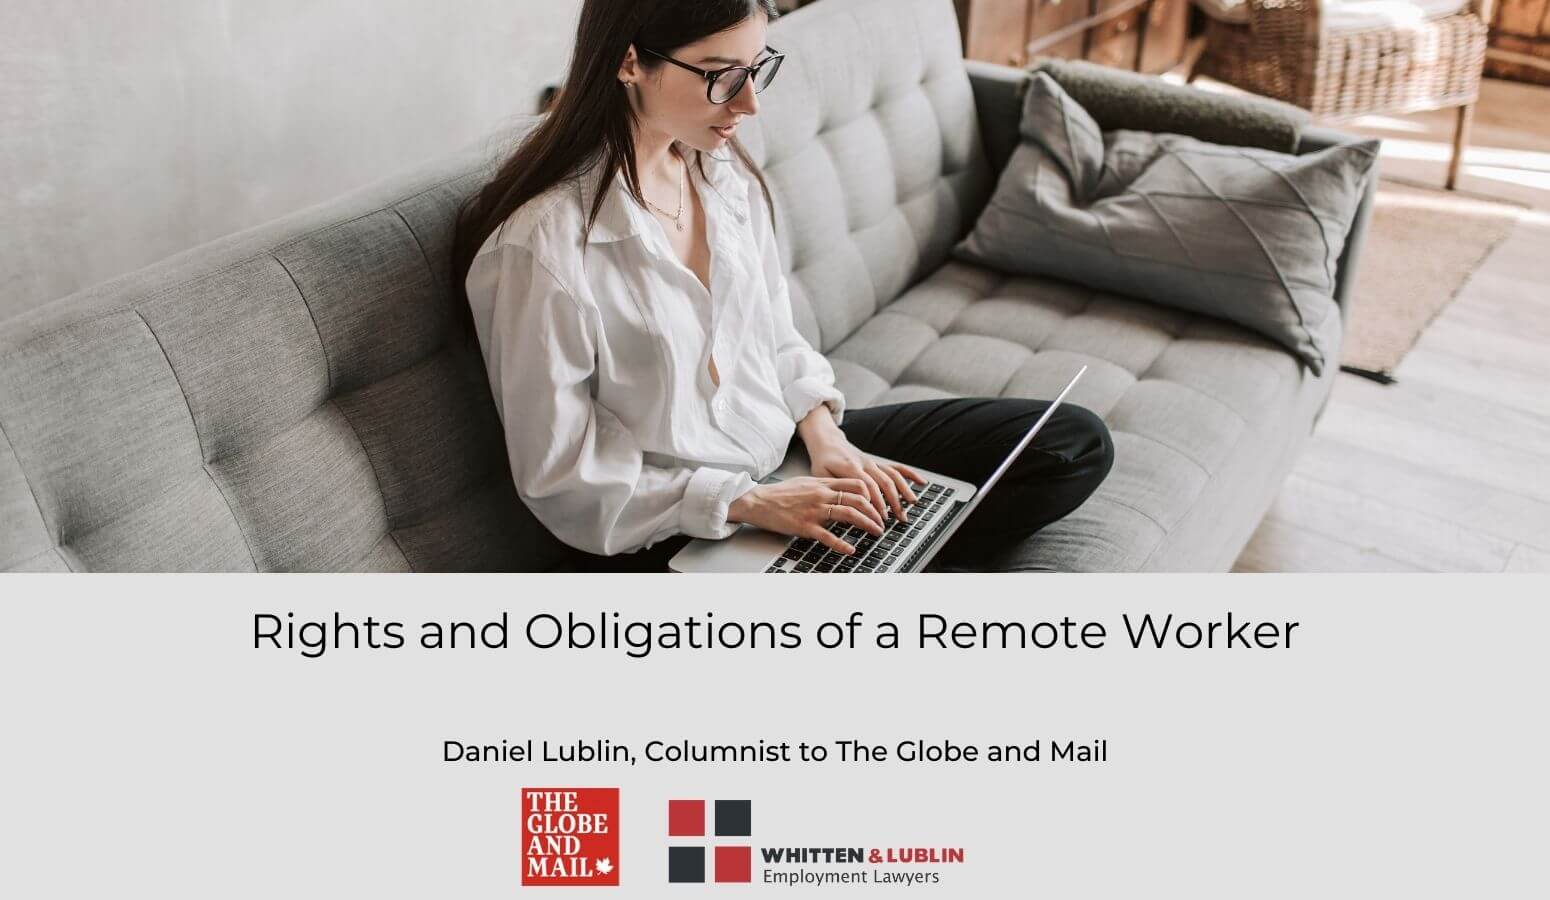 Rights and obligations of a remote worker